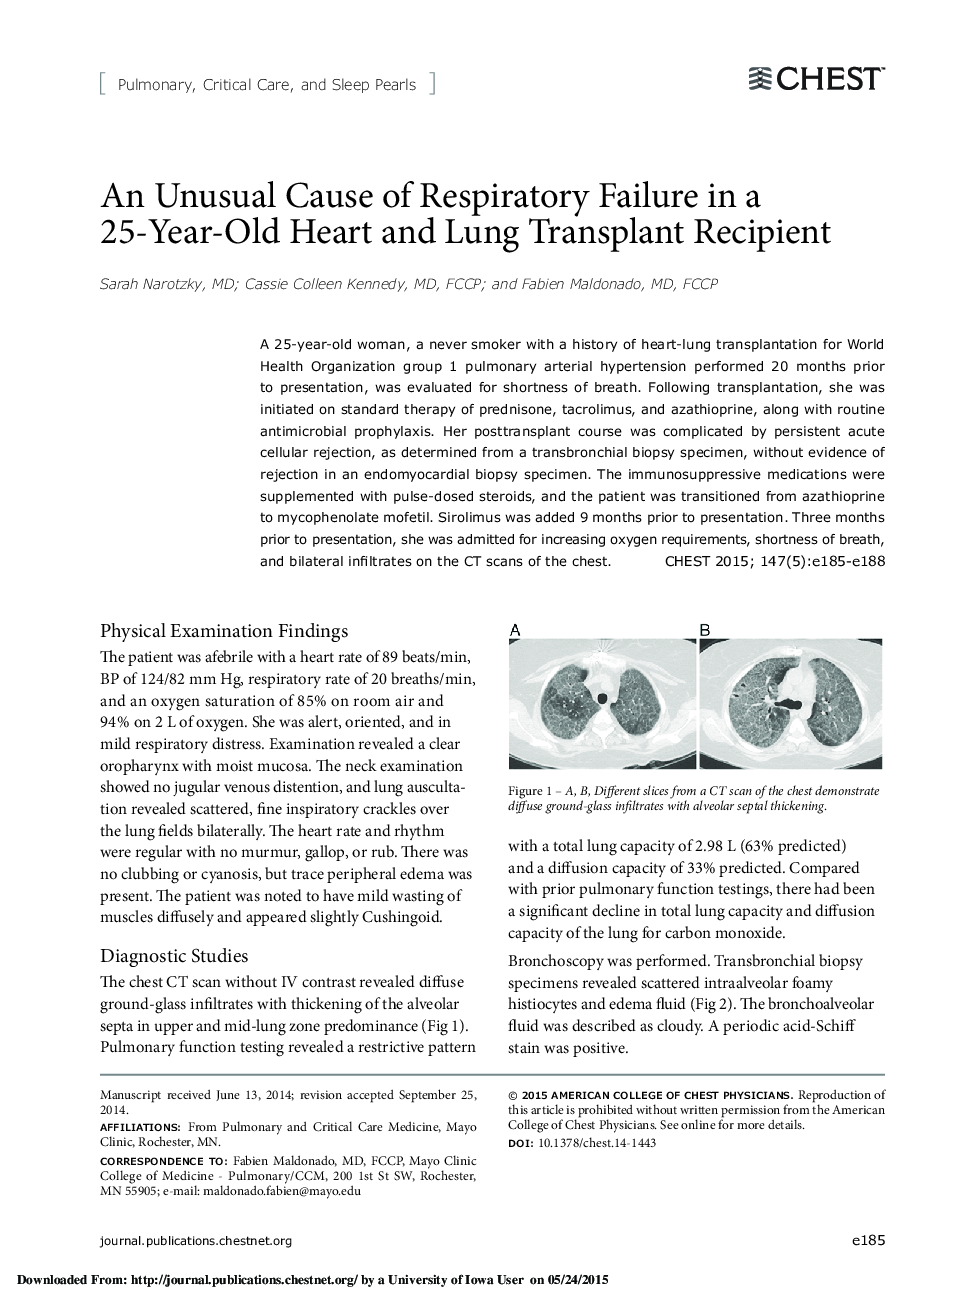 An Unusual Cause of Respiratory Failure in a 25-Year-Old Heart and Lung Transplant Recipient